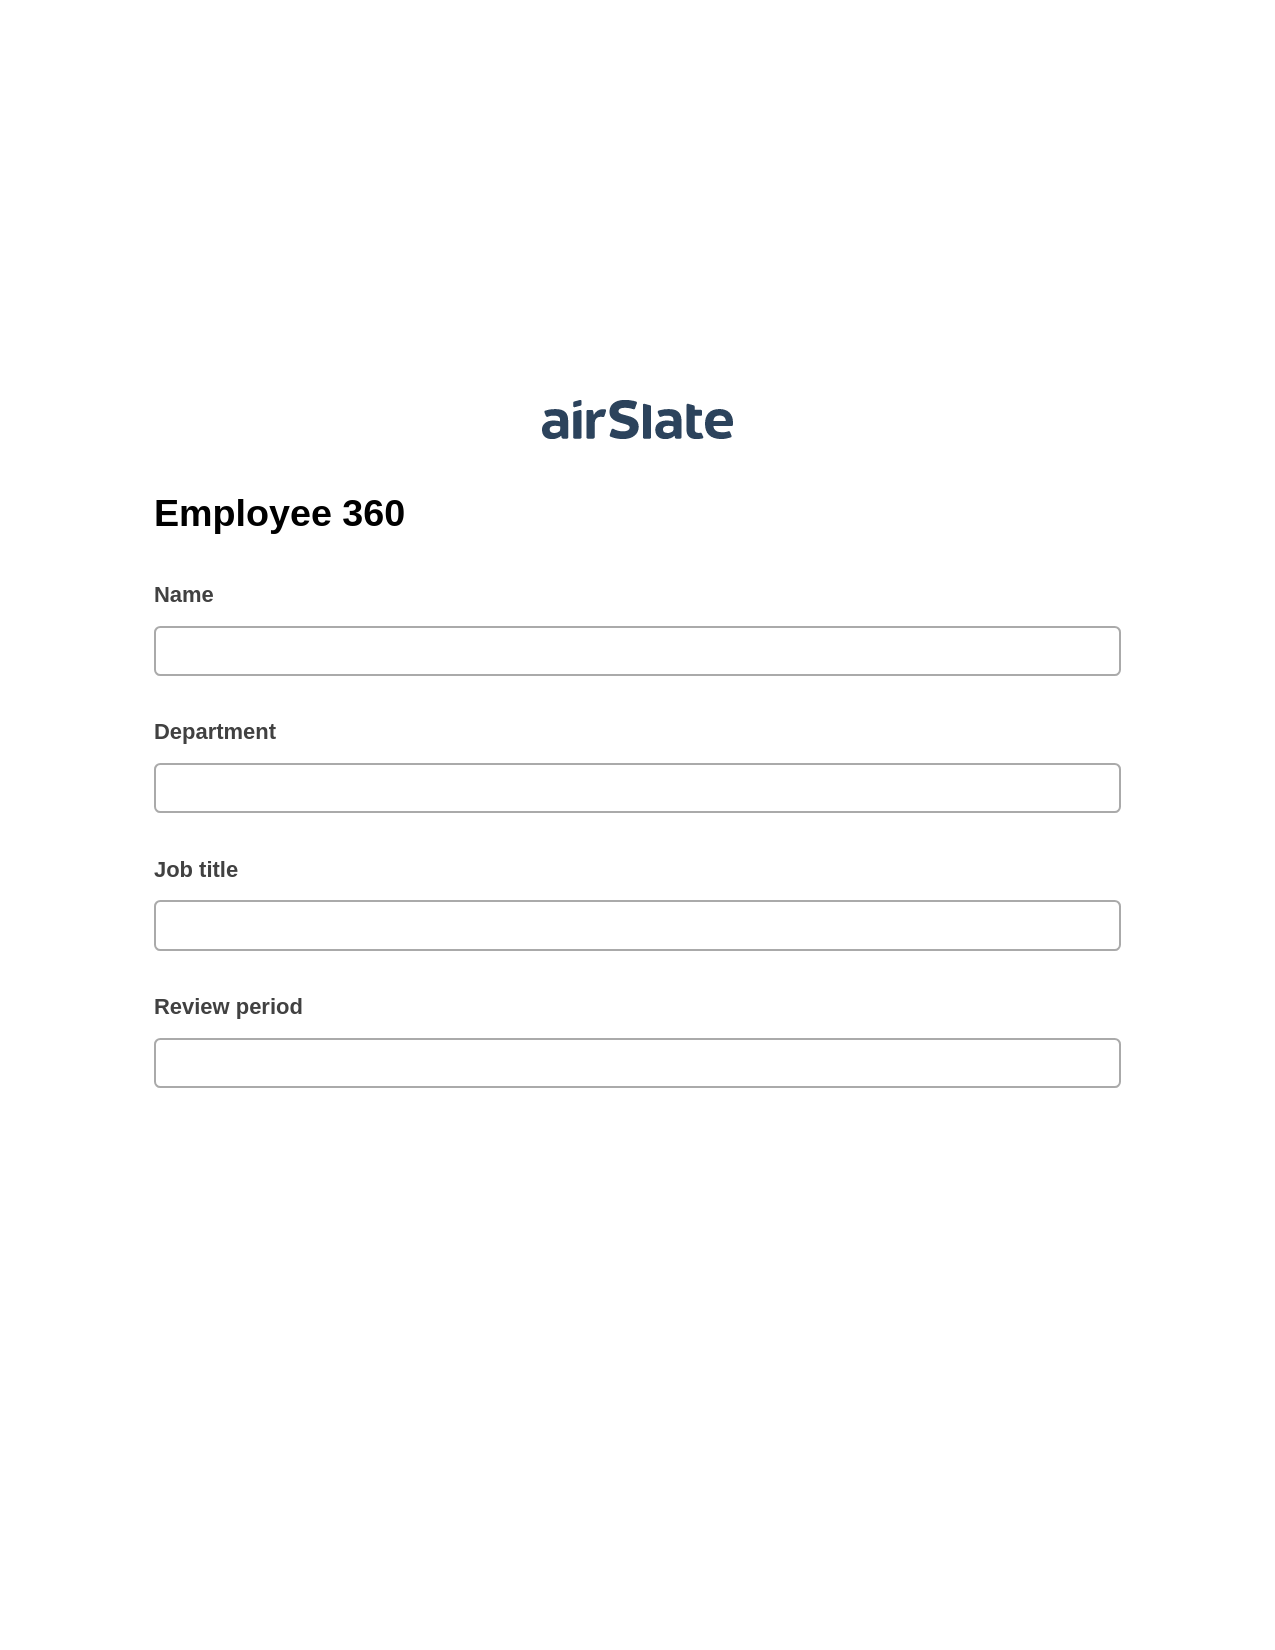 Multirole Employee 360 Prefill from NetSuite records, Lock the Slate Bot, Export to Salesforce Record Bot